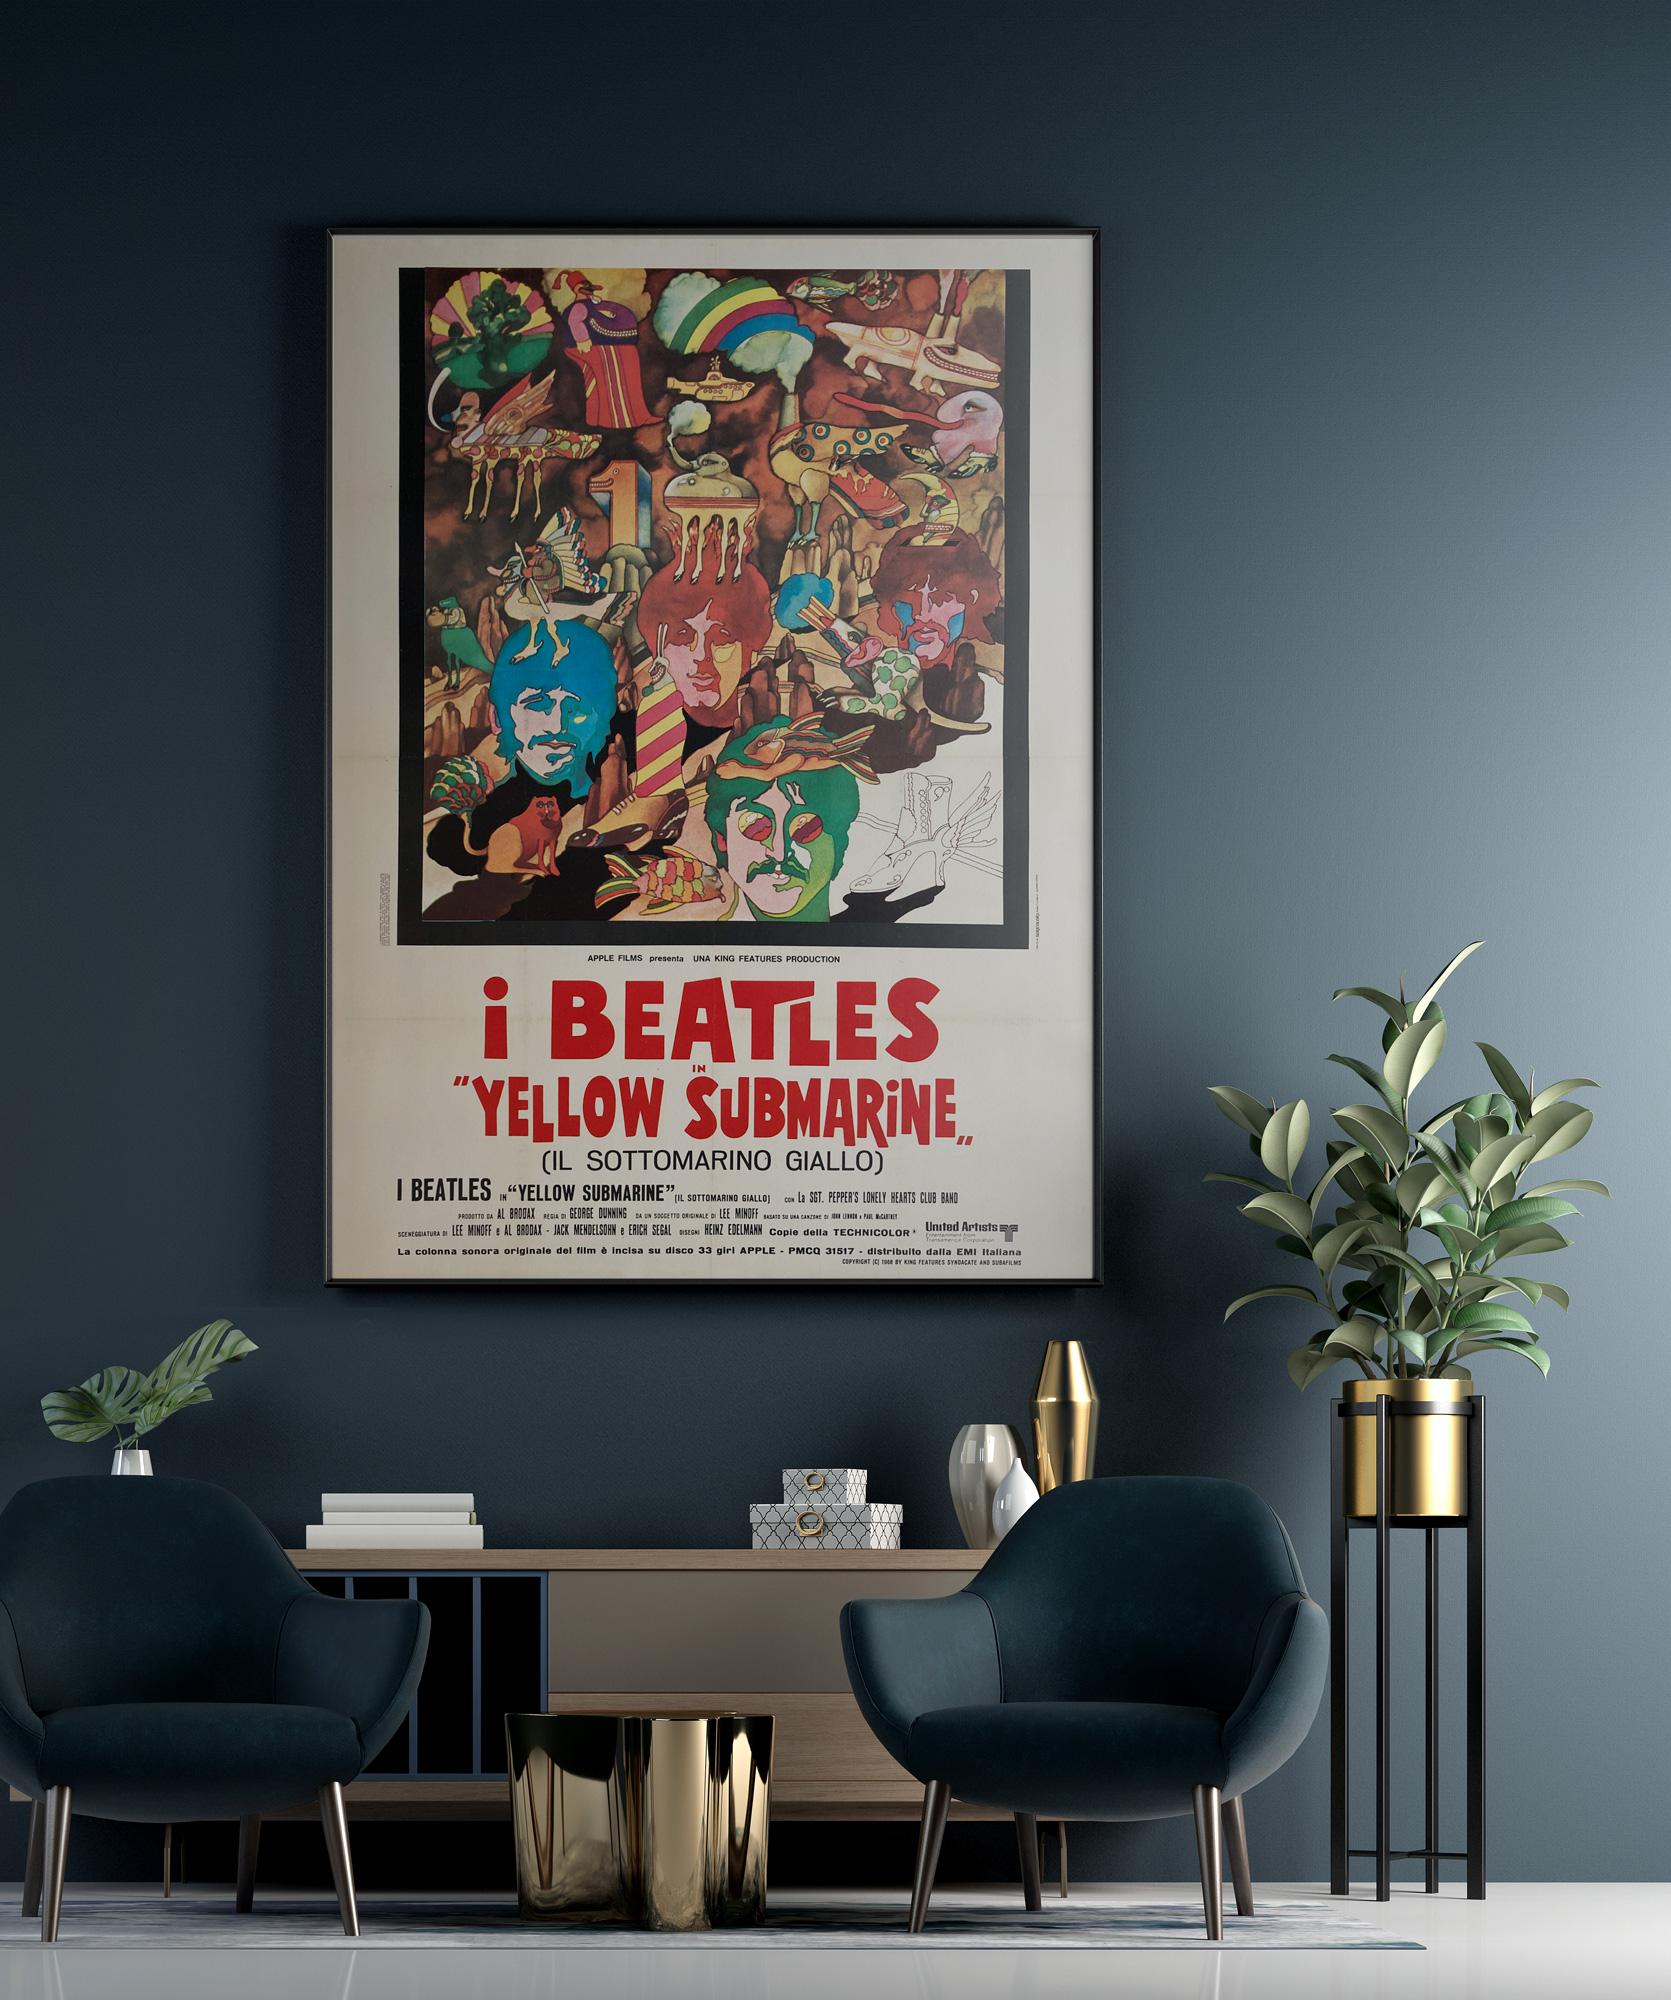 The, suitably, psychedelic artwork on the Italian 2 Foglio film poster for the Beatles' classic Yellow Submarine is, well, groovy baby. Sure to brighten up any space in which it hangs.

This original vintage movie poster has been professionally